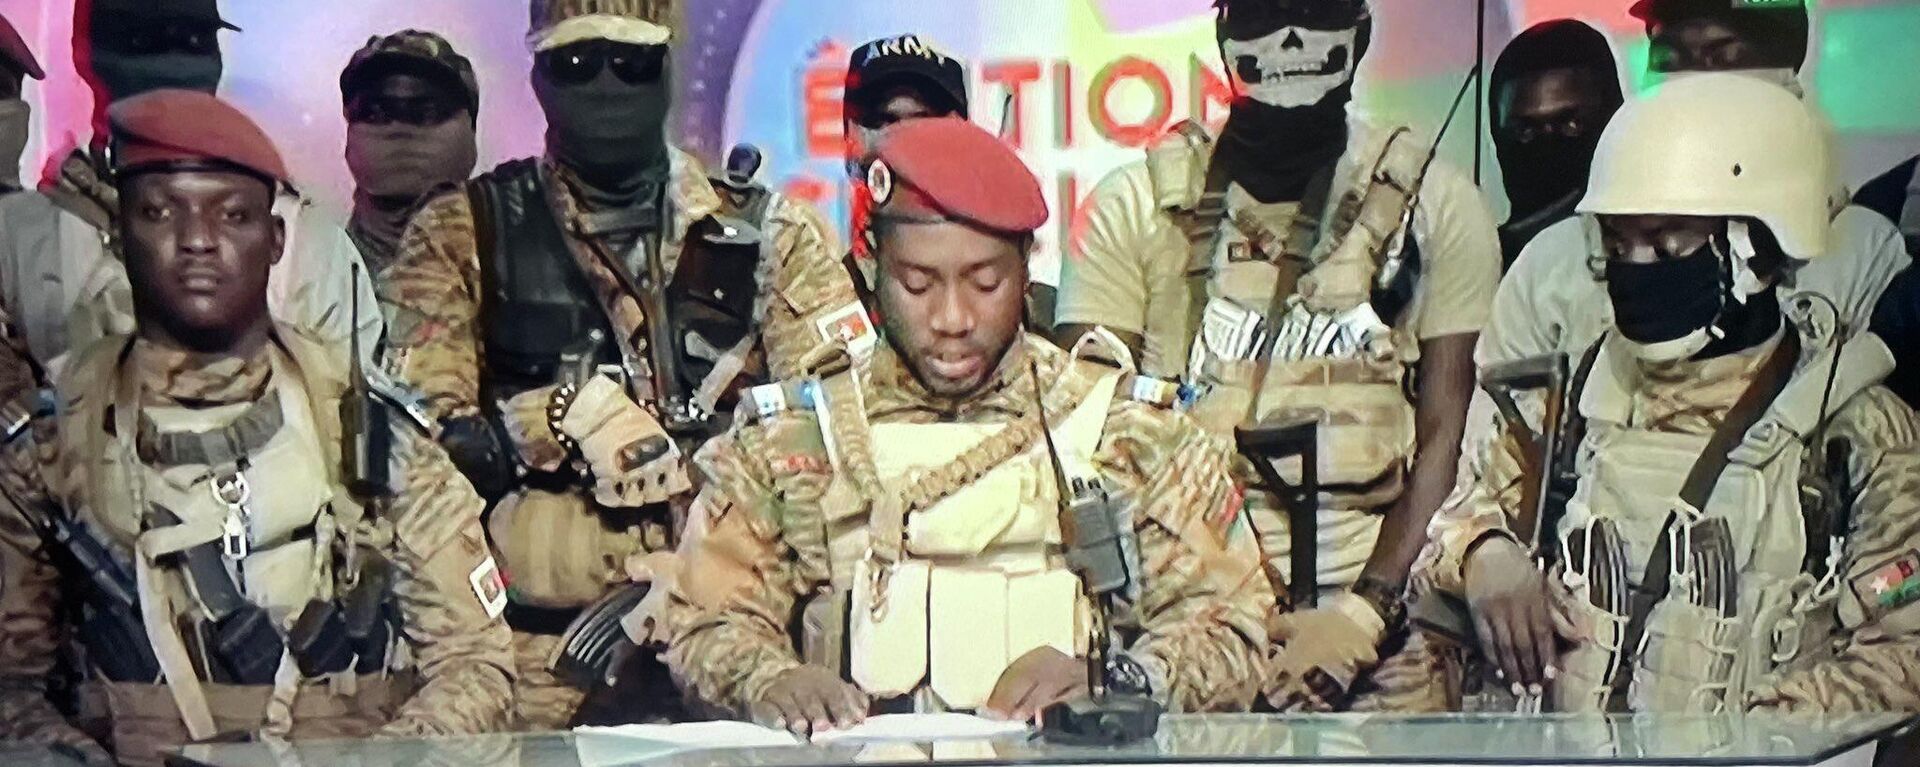 Burkina Faso Armed Forces Capt. Ibrahim Traore and other officers read a statement on Burkinabe television on September 30, 2022, announcing the overthrow of Paul-Henri Damiba, who himself took power using the military in January 2022. - Sputnik International, 1920, 30.09.2022